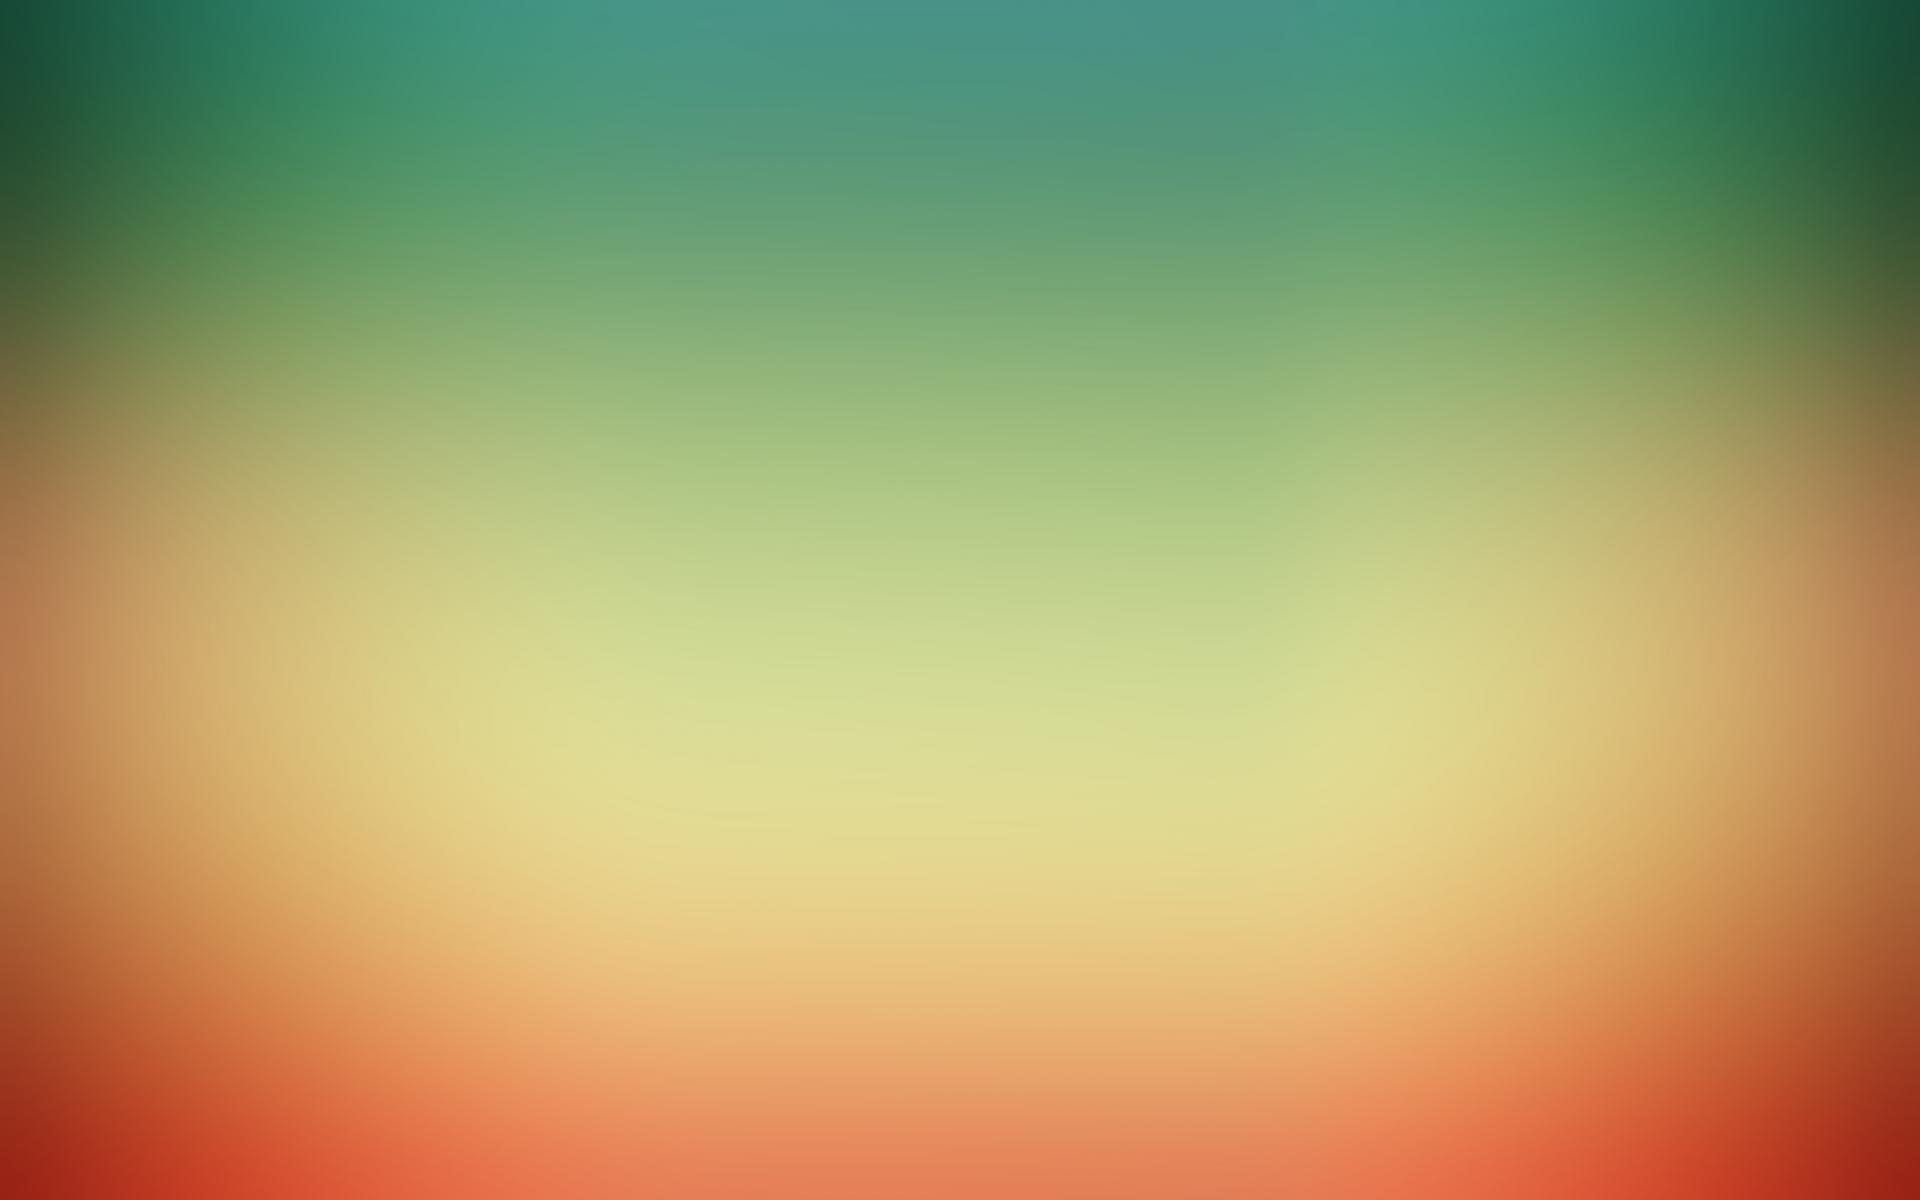 Gradient As Backgrounds